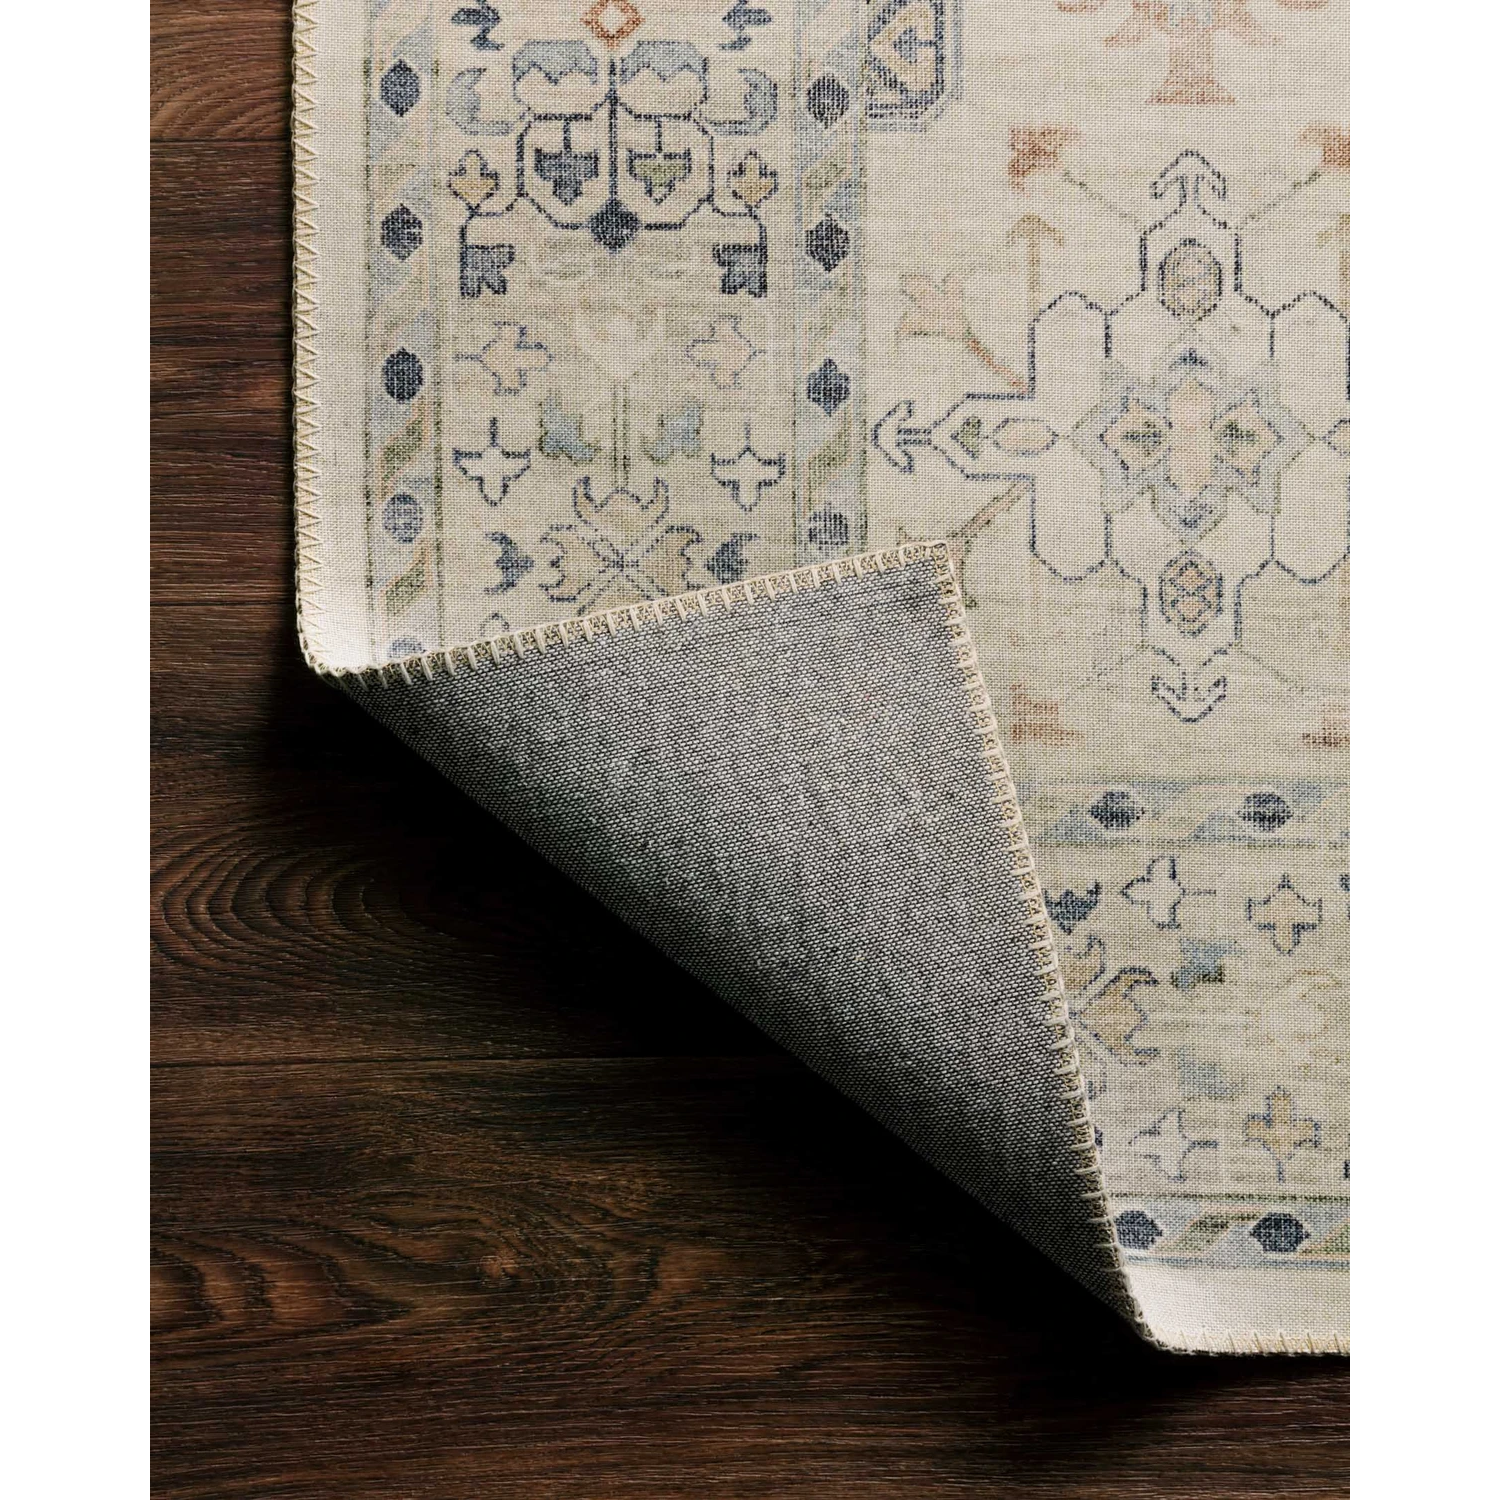 Hathaway Rug by Loloi - HTH-04 Beige/Multi-Loloi Rugs-Blue Hand Home